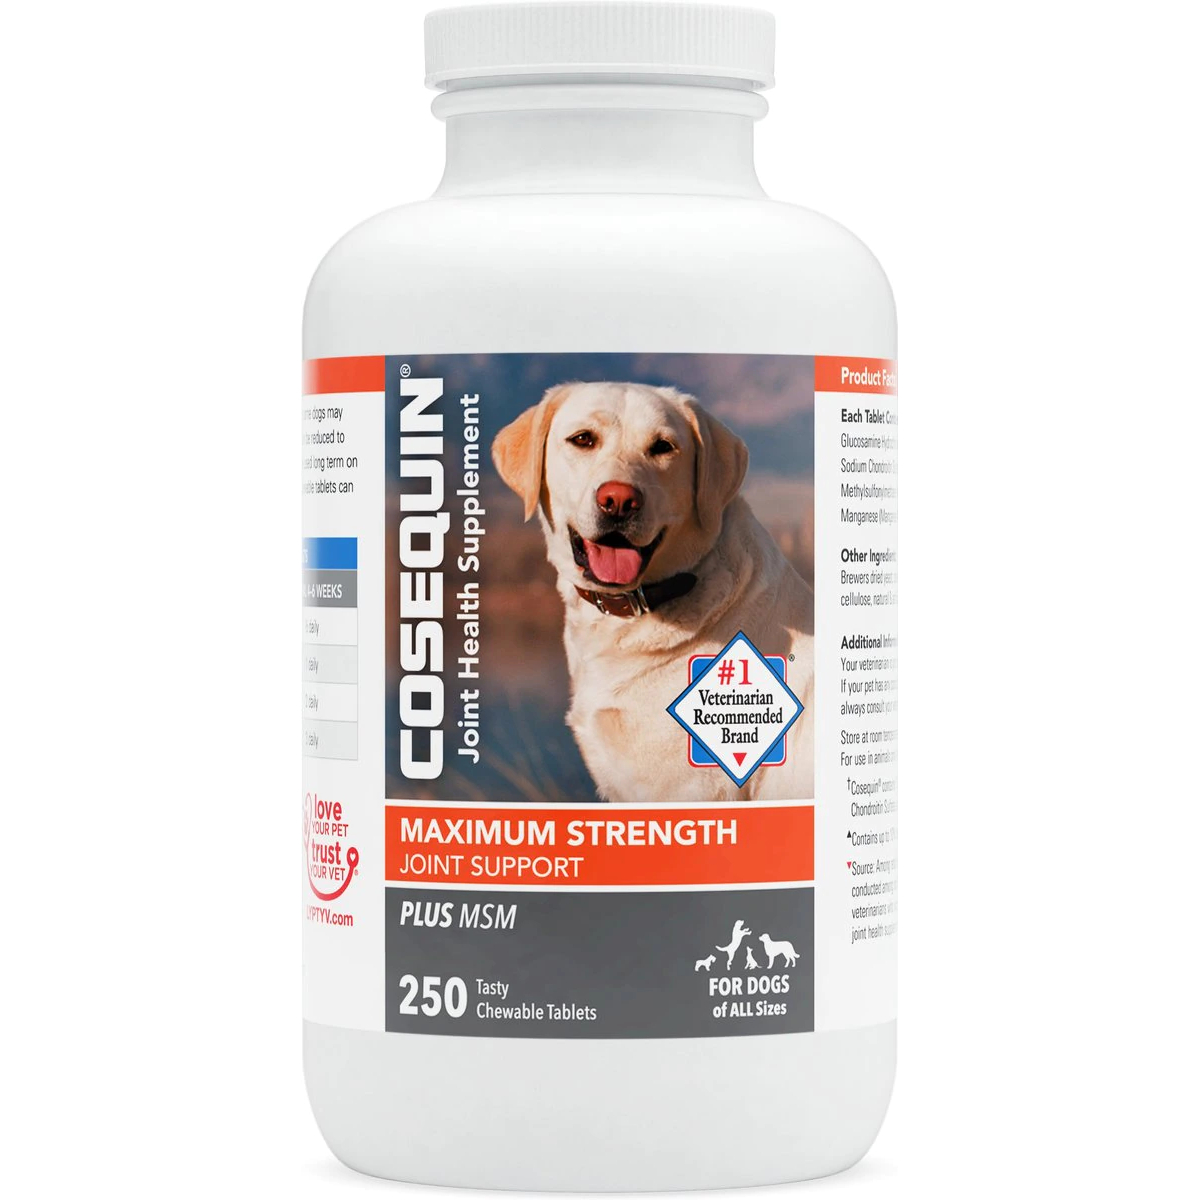 Nutramax Cosequin Hip & Joint Maximum Strength Plus MSM Chewable Tablets Joint Supplement for Dogs